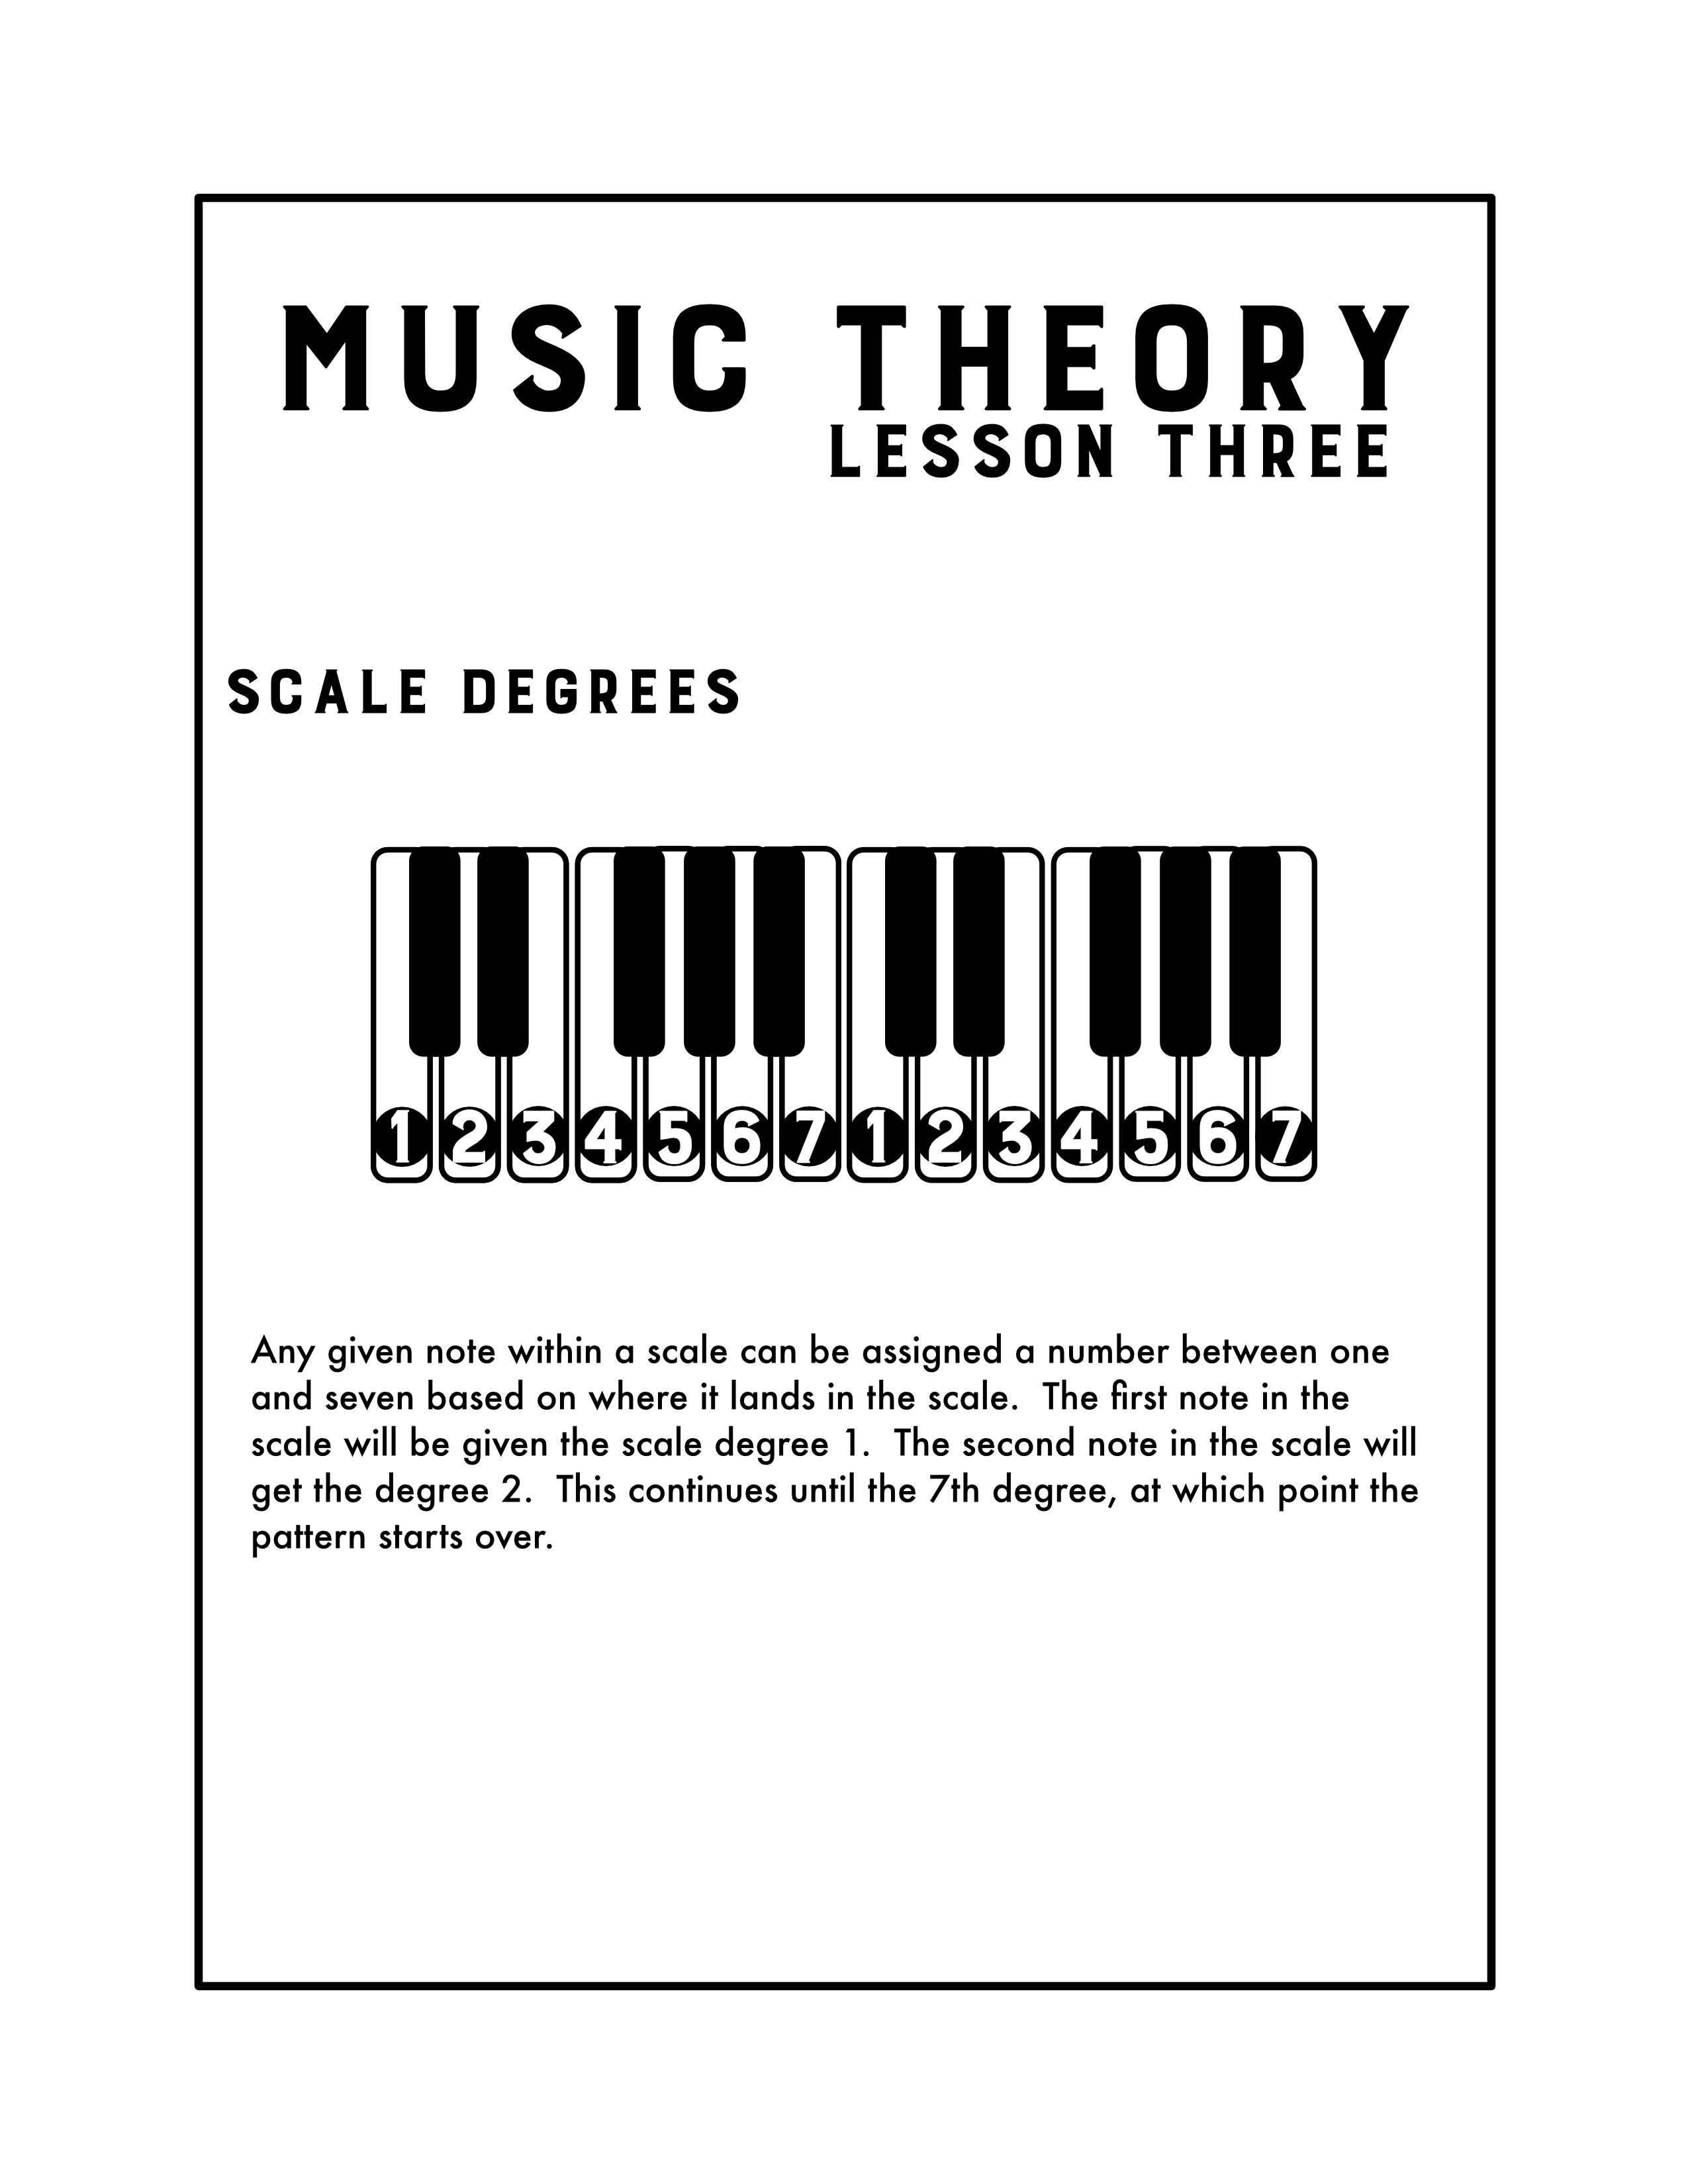 Music Theory Lesson 3